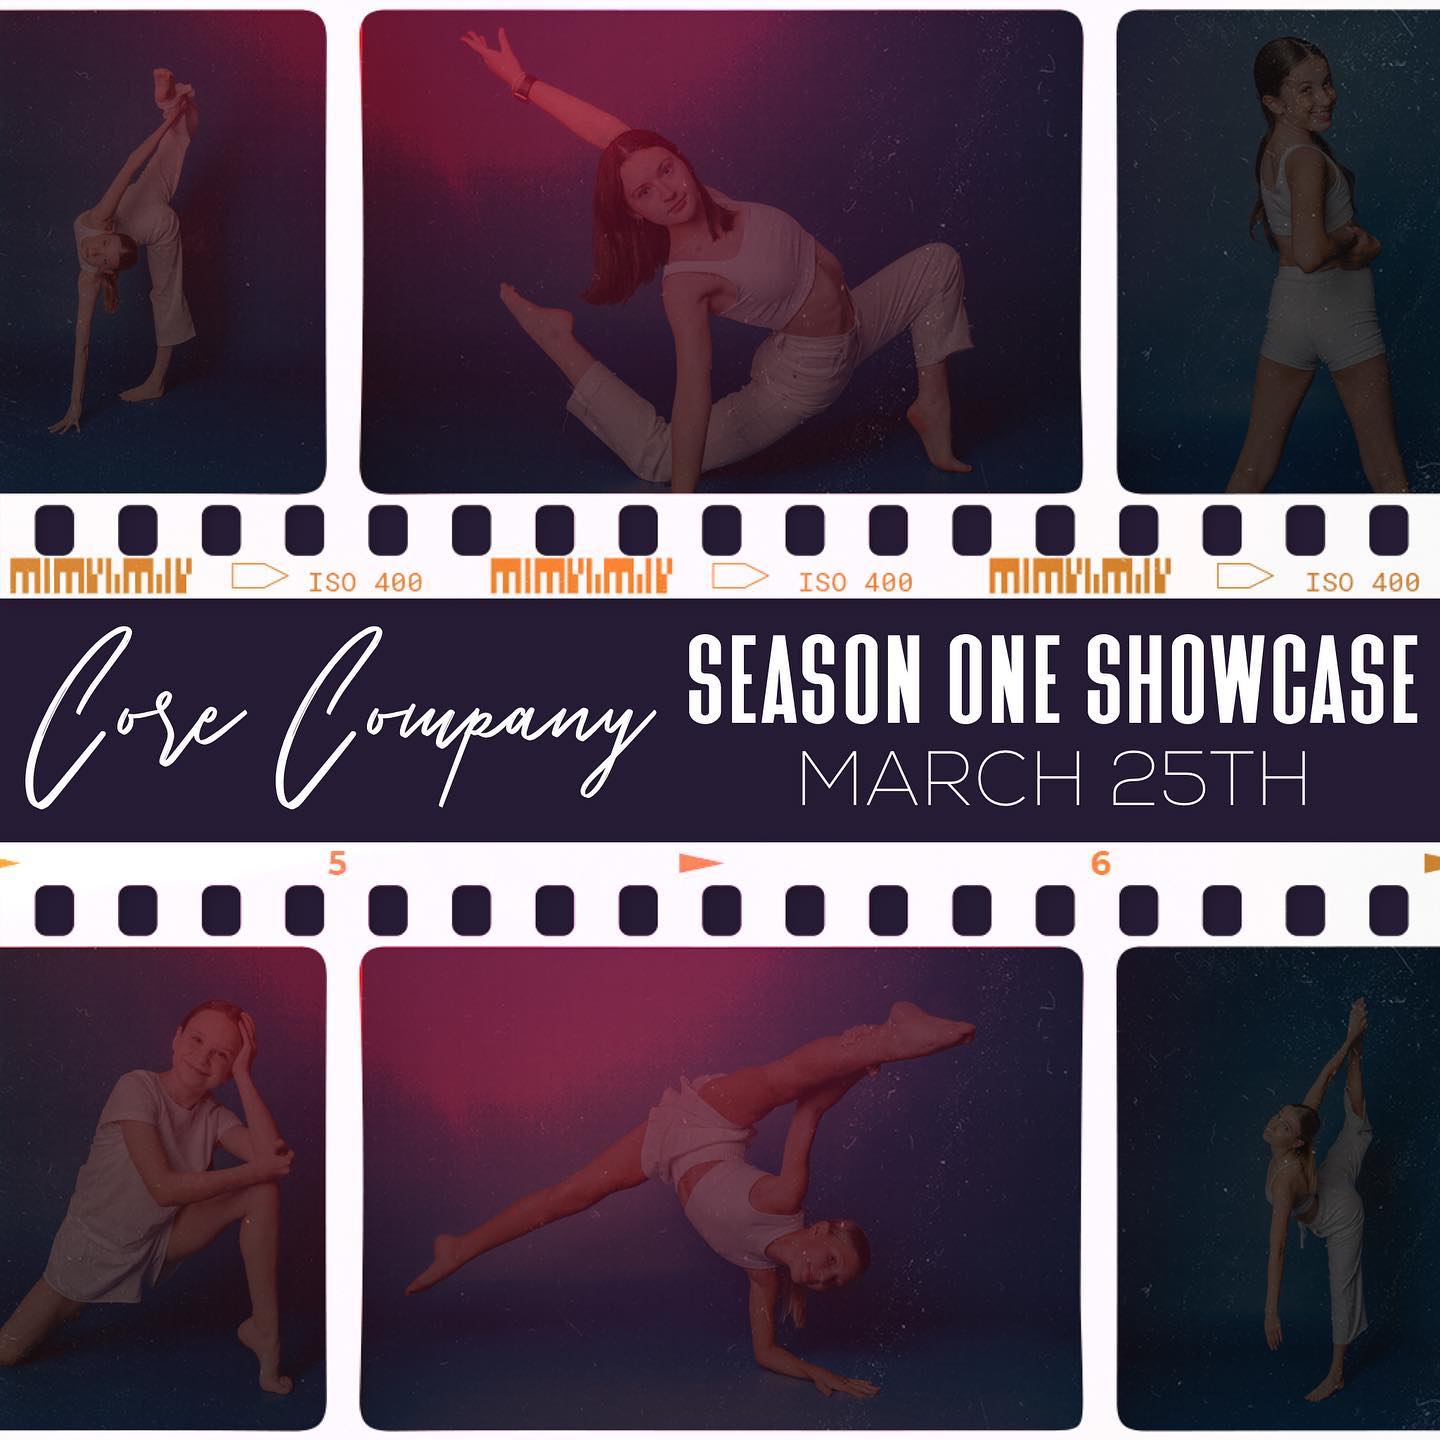 Images of dancers. Text reads: Core Company, Season One Showcase, March 25th